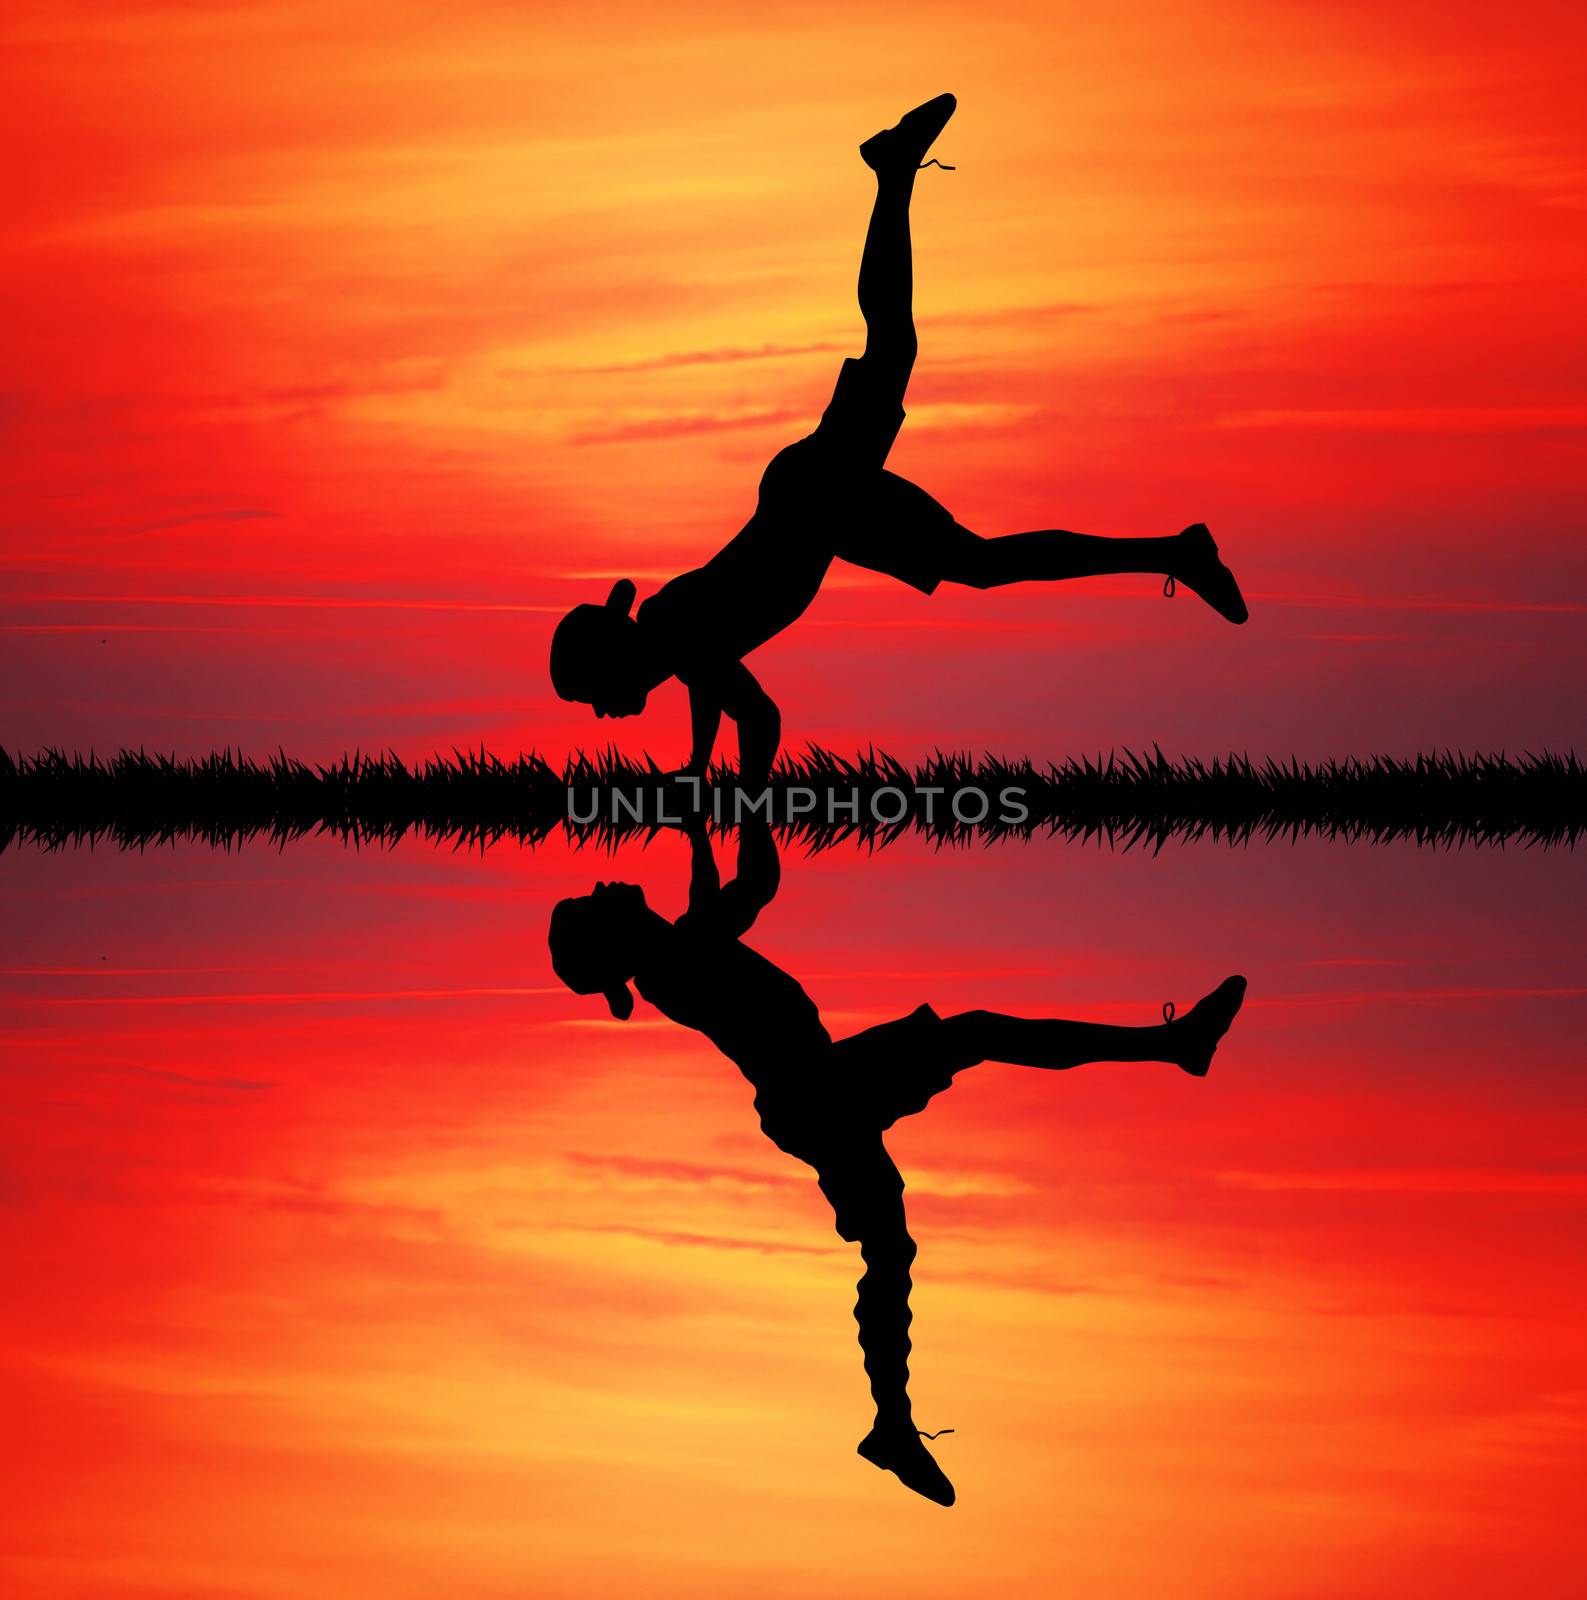 breakdance at sunset by sognolucido